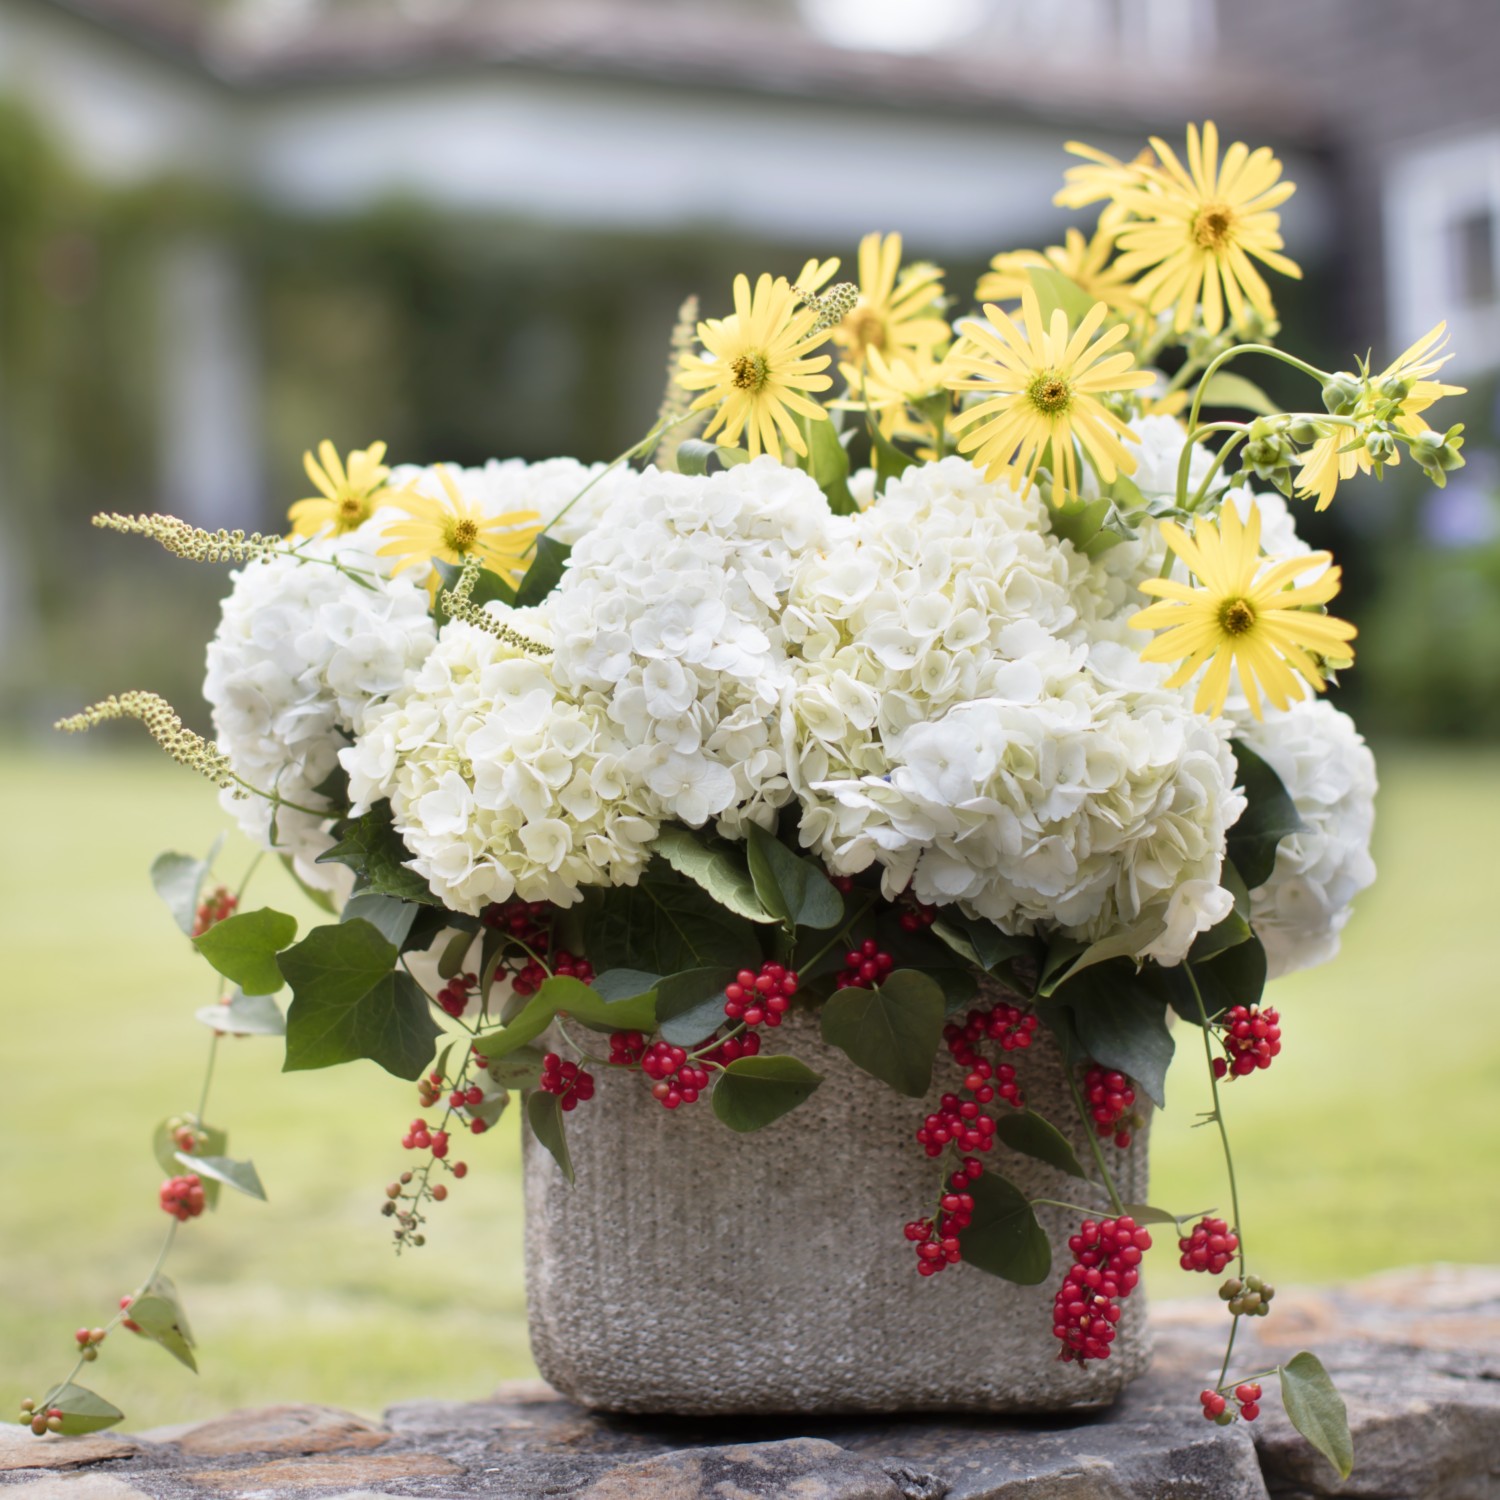 Arrangement of white hydrangea blossoms with yellow rosinweed (Silphium) flowers, and red berries.